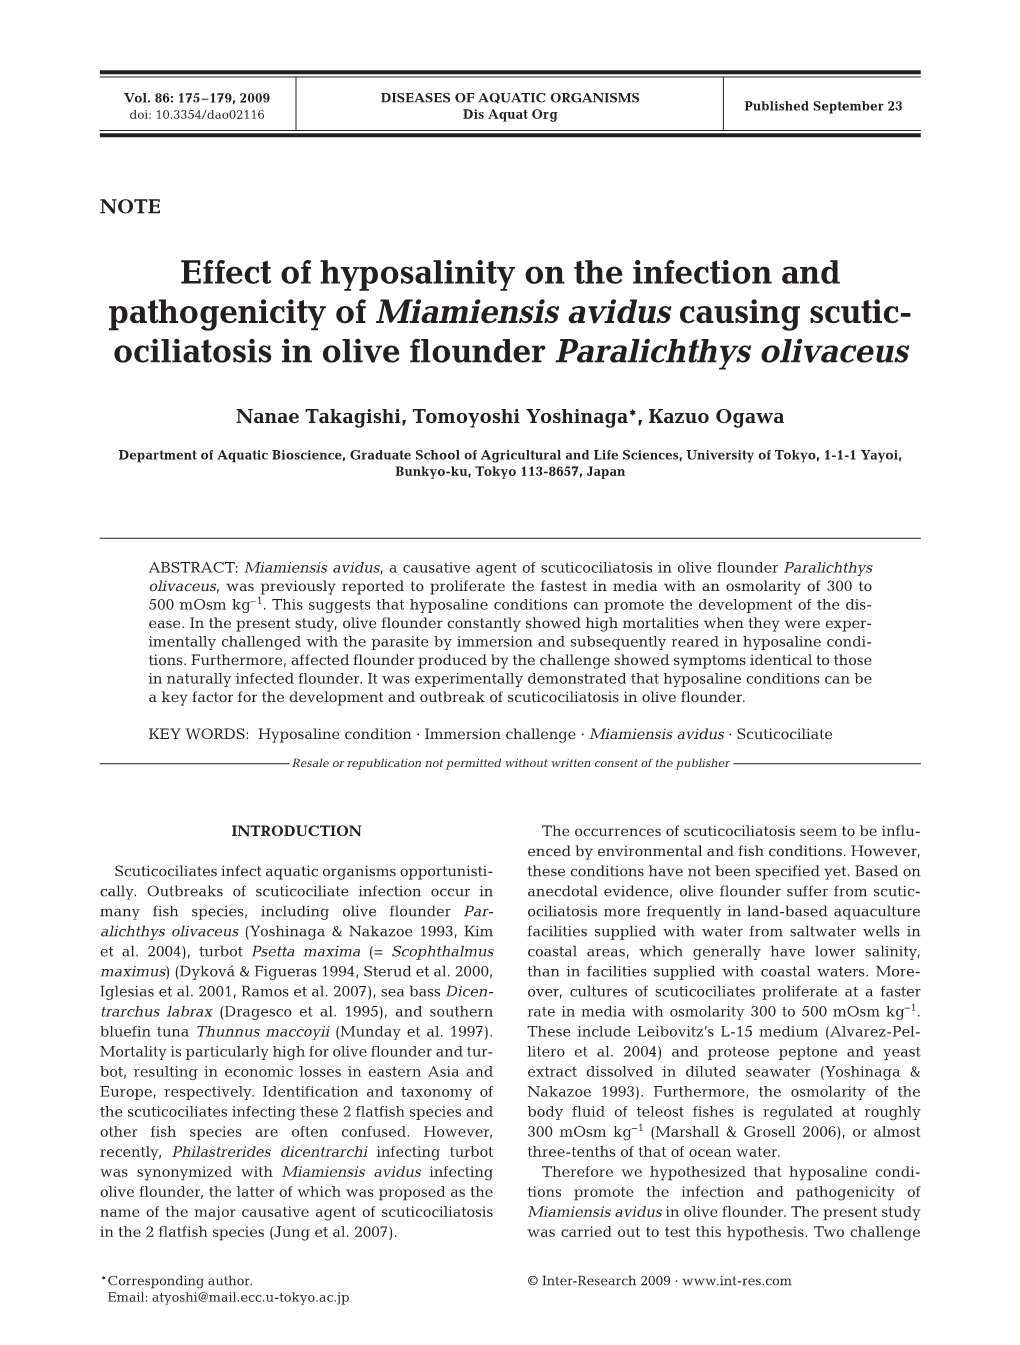 Effect of Hyposalinity on the Infection and Pathogenicity of Miamiensis Avidus Causing Scutic- Ociliatosis in Olive Flounder Paralichthys Olivaceus